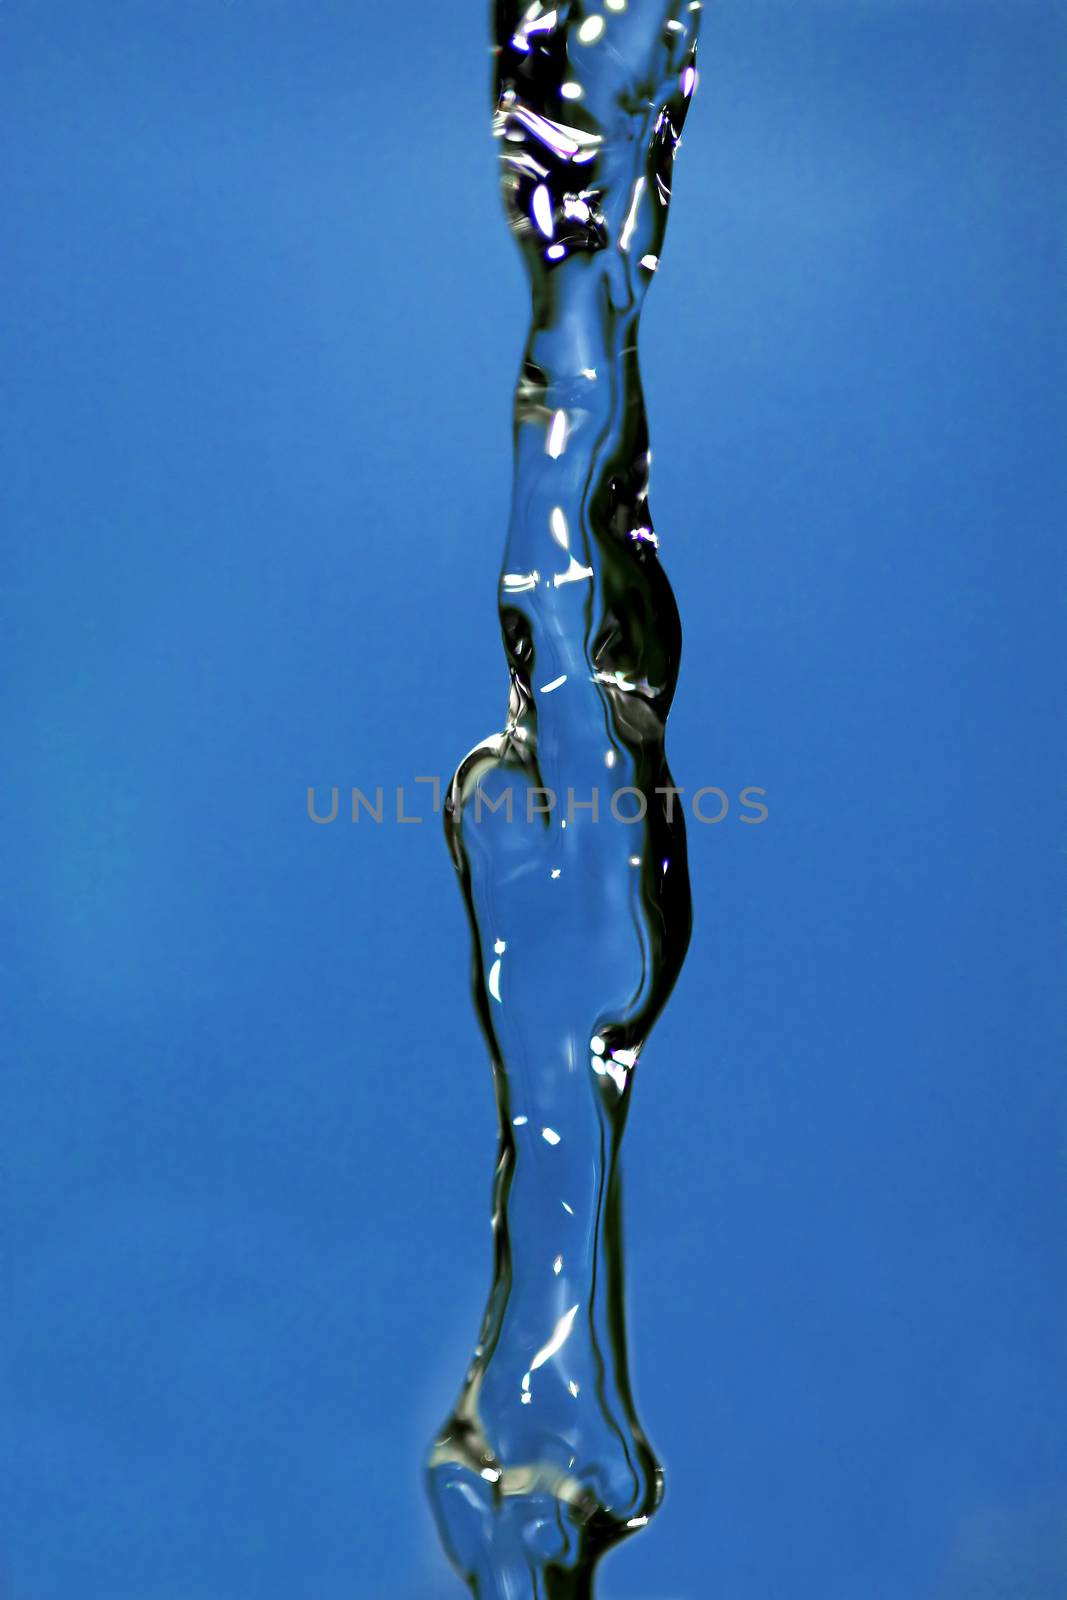 Water falling down, frozen in time with blue background.